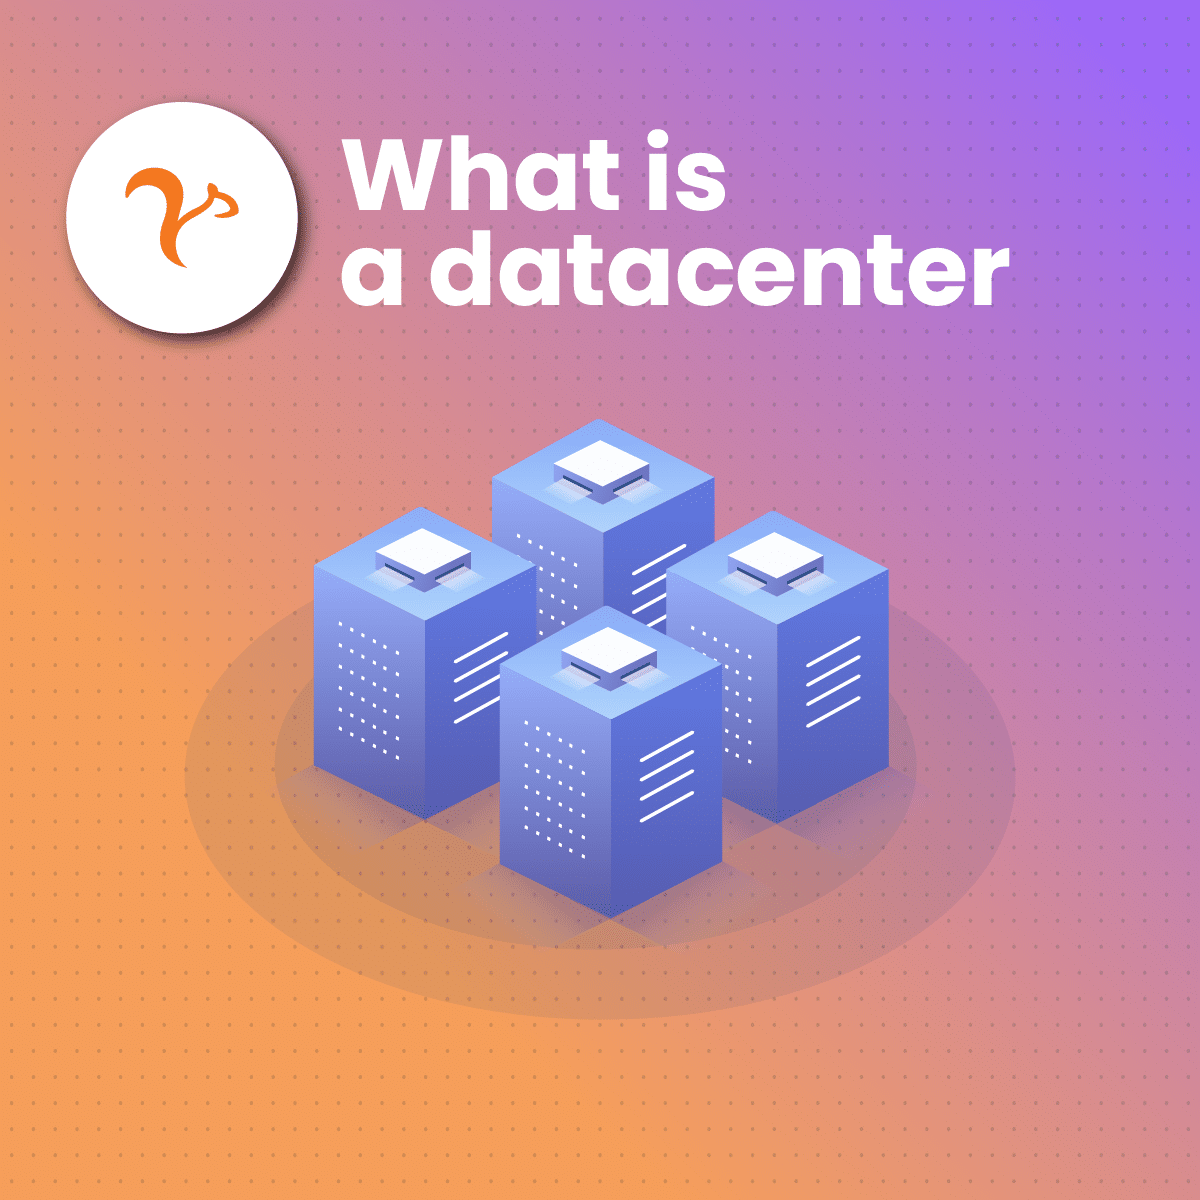 What is a datacenter